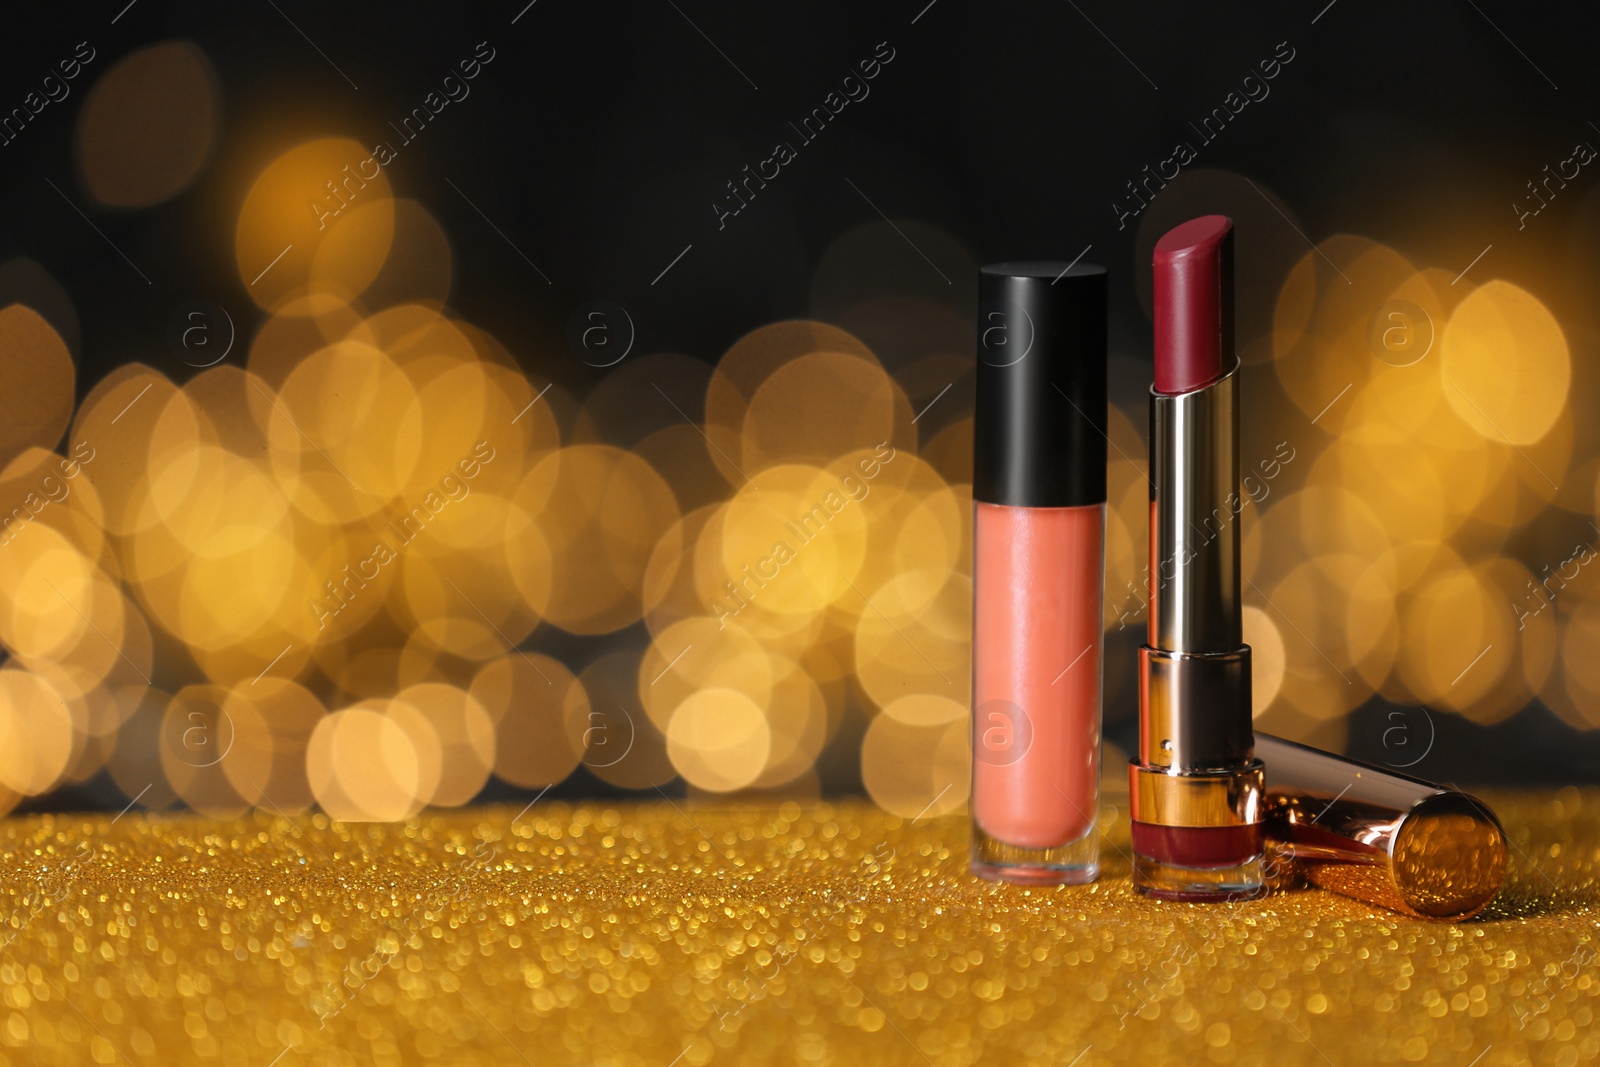 Photo of Bright lipsticks on table with gold glitter against blurred lights, space for text